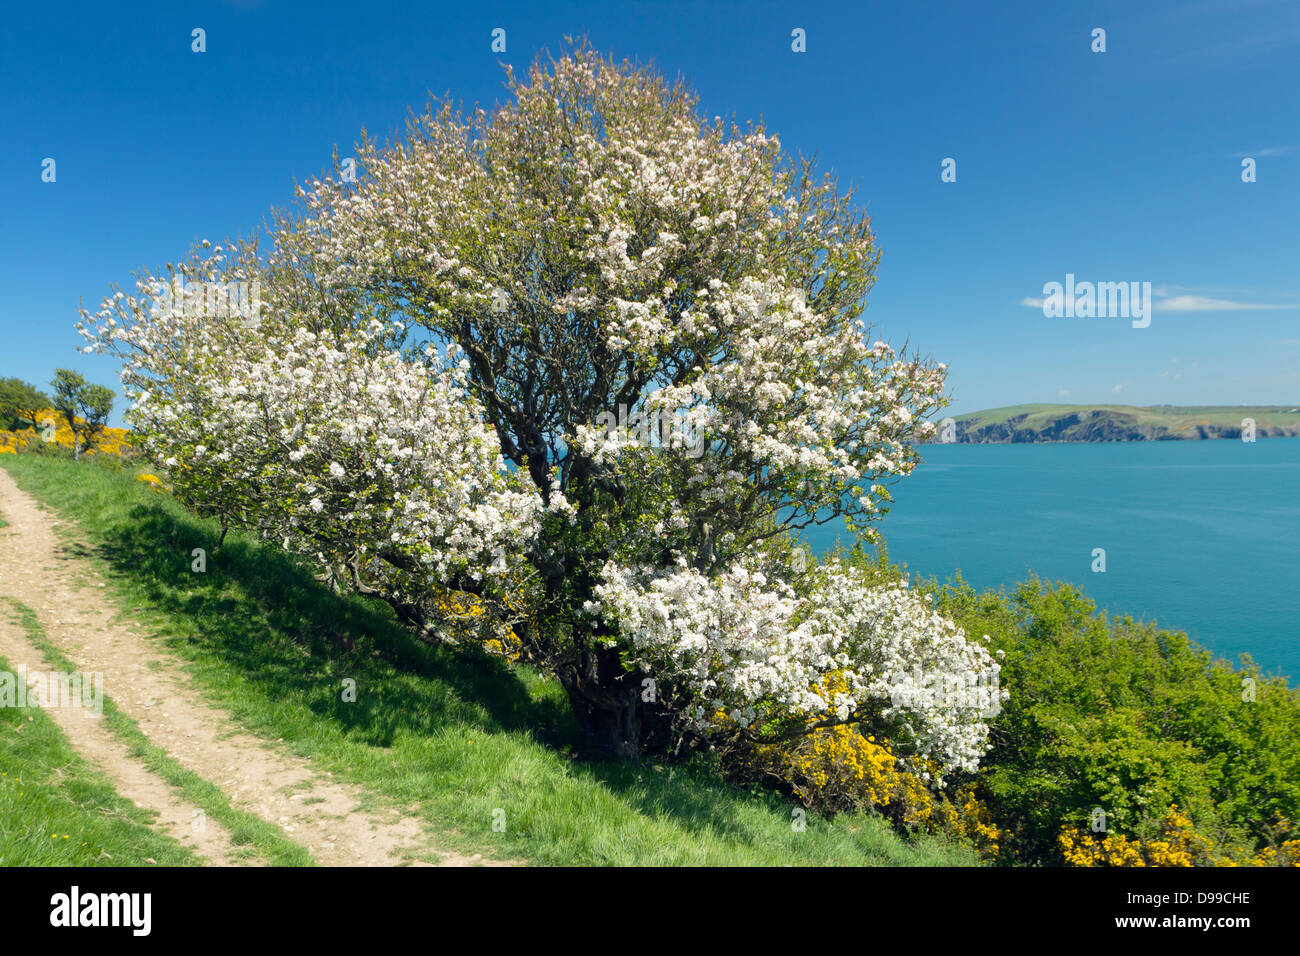 Crab apple tree (Malus sylvestris) in bloom on the Pembrokeshire Coast of Wales, UK Stock Photo